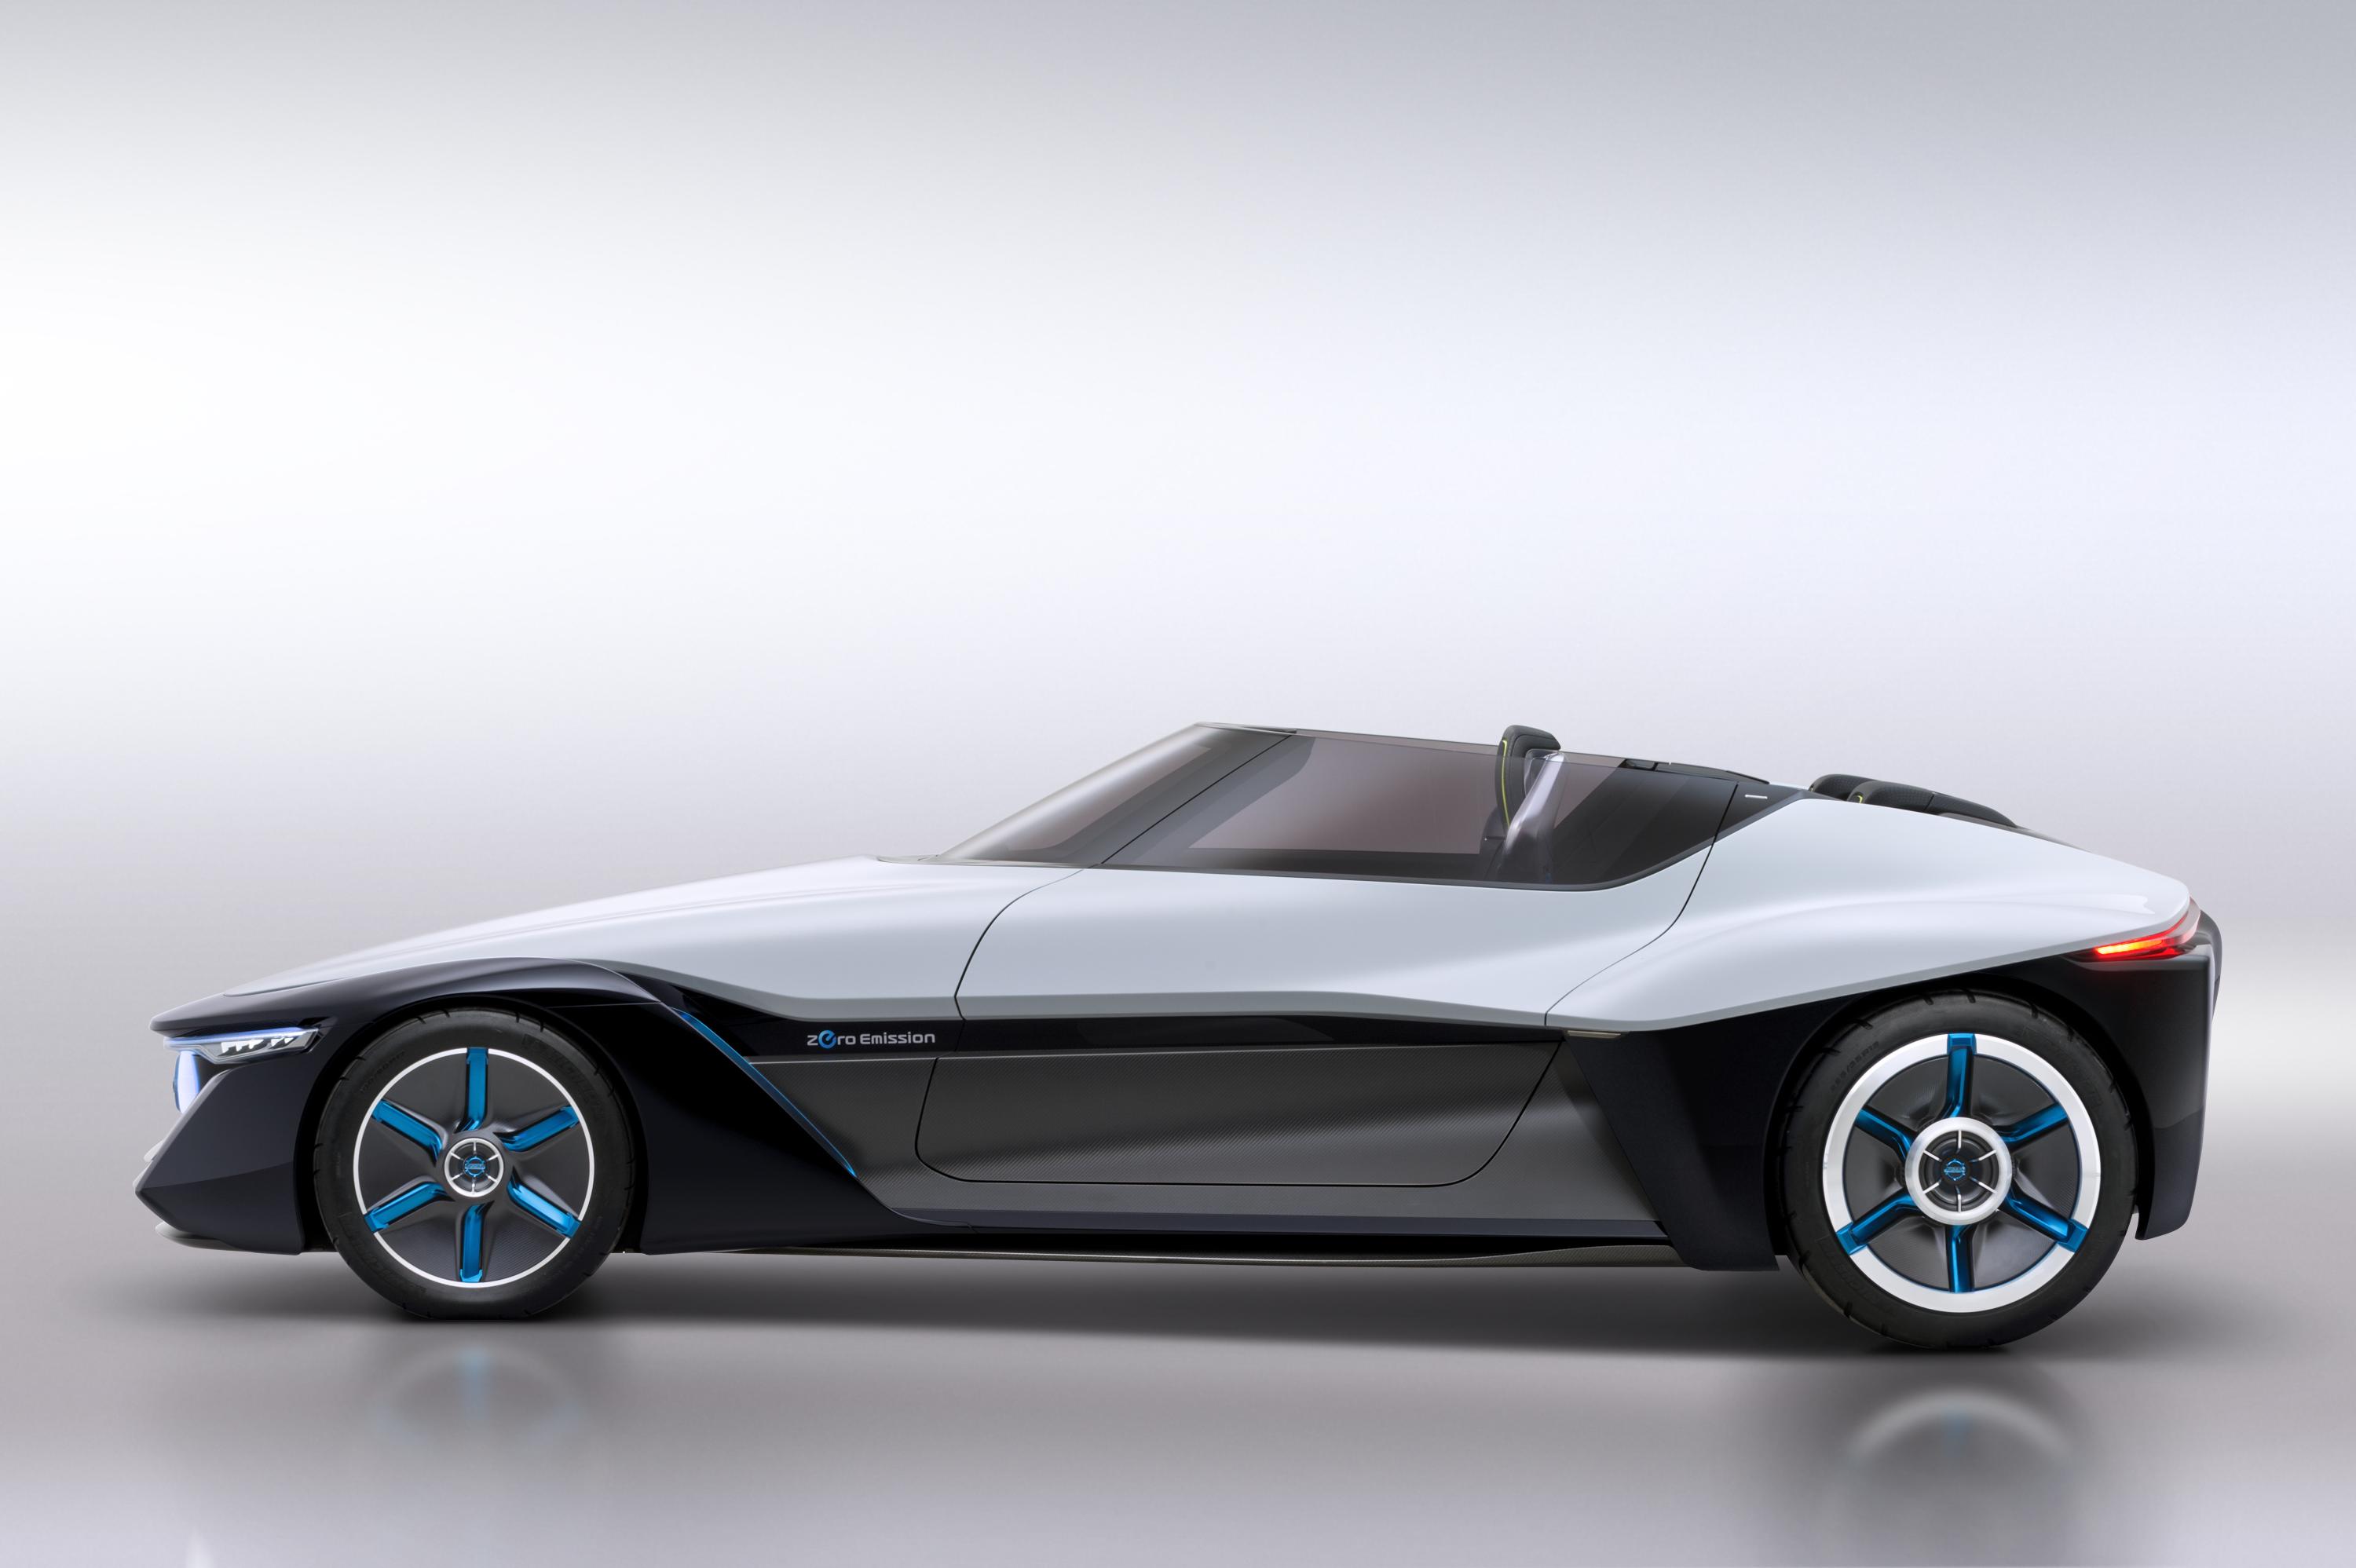 Nissan BladeGlider Backgrounds, Compatible - PC, Mobile, Gadgets| 3000x1997 px